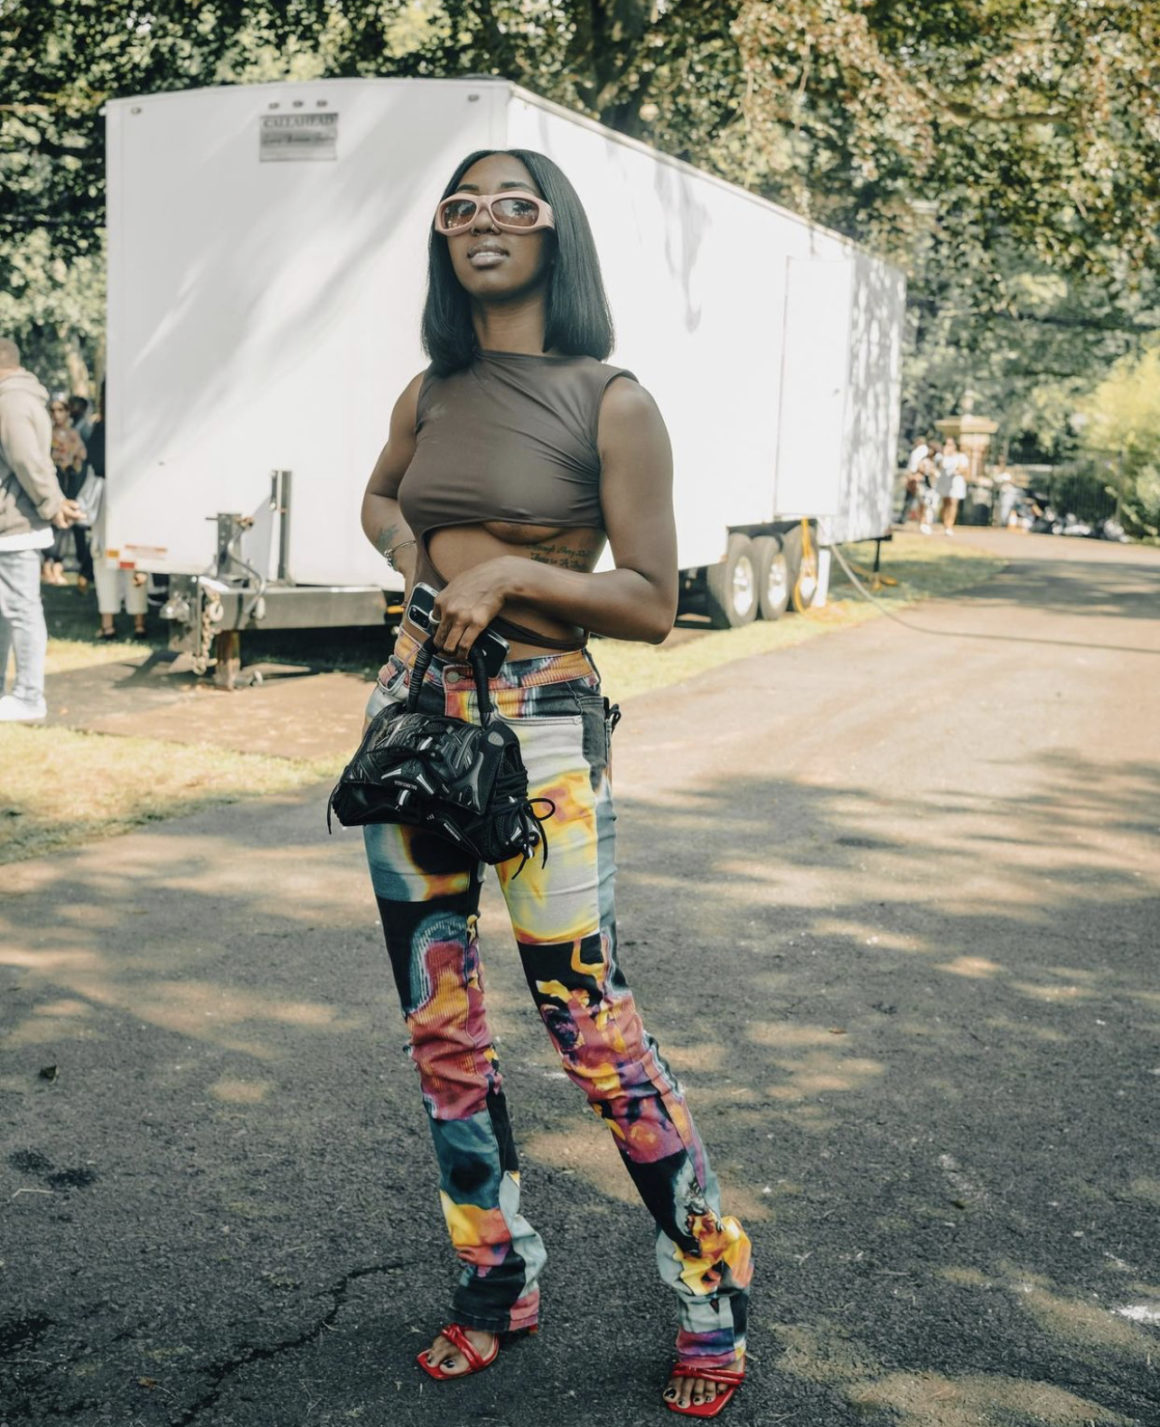 On the Scene at the Pyer Moss 'WAT U IZ' Couture Show: Best Street Style  Moments Featuring Jerome Lamaar, Amiraa Vee, Law Roach, and More – Fashion  Bomb Daily